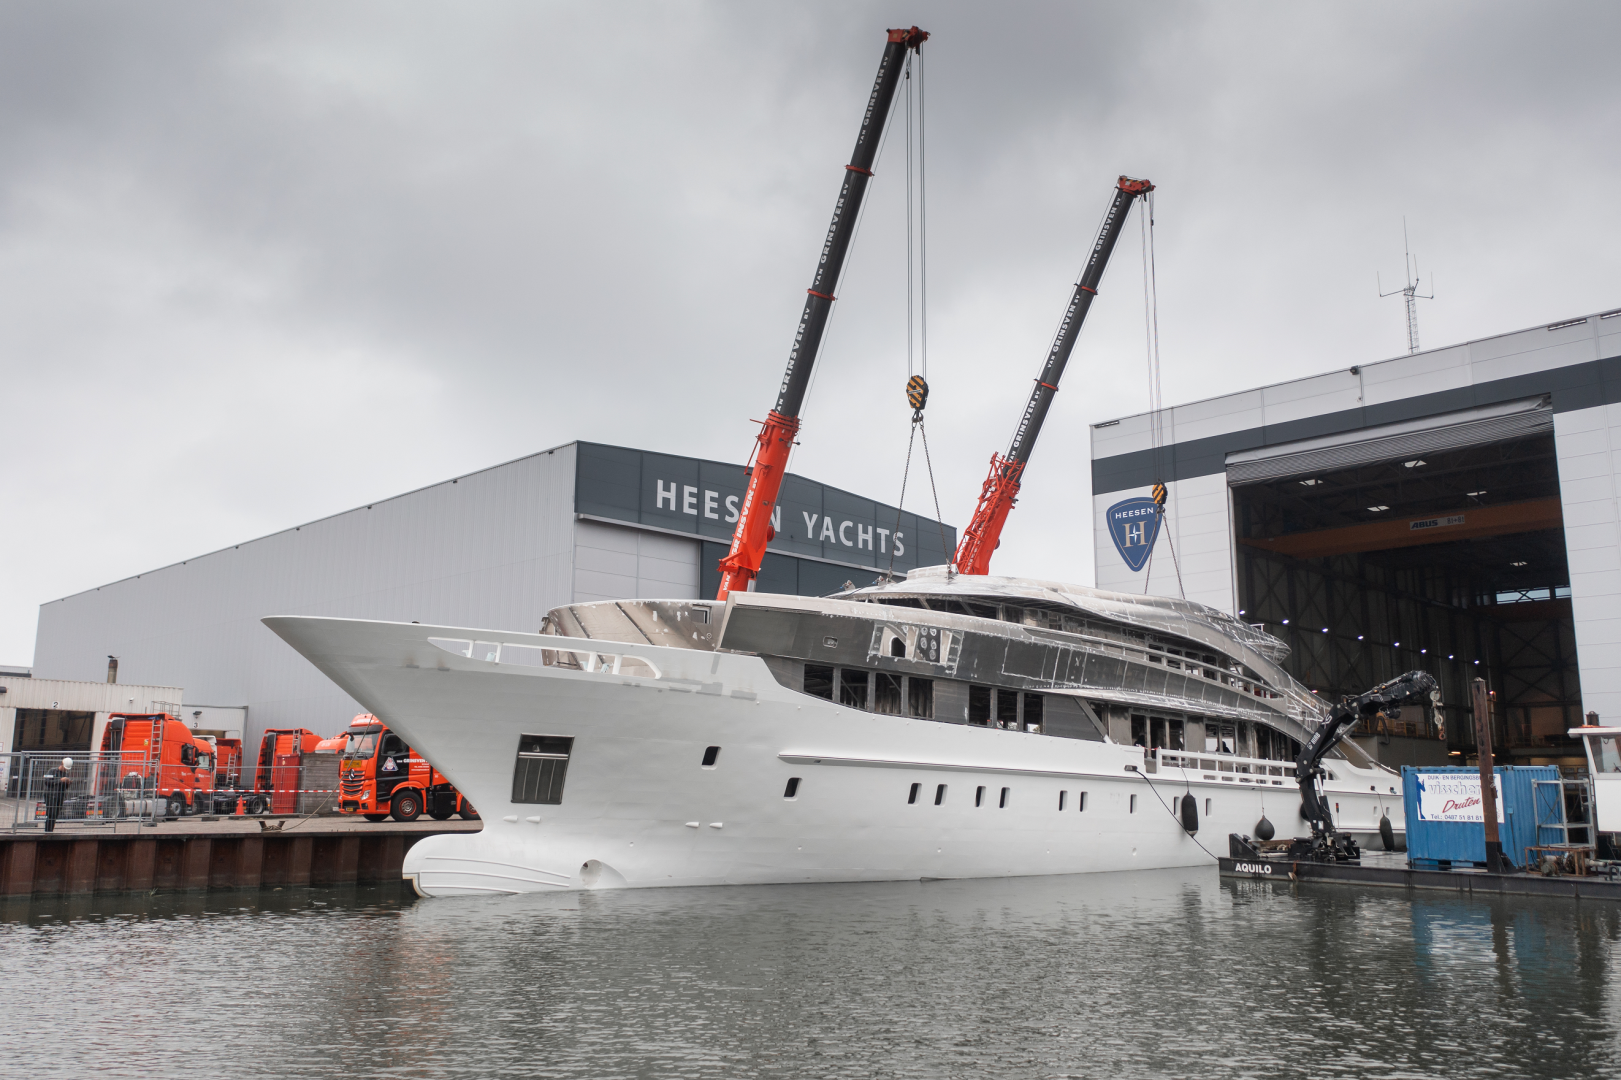 The hull and superstructure of YN 20150 Project Oslo24 are now joined together